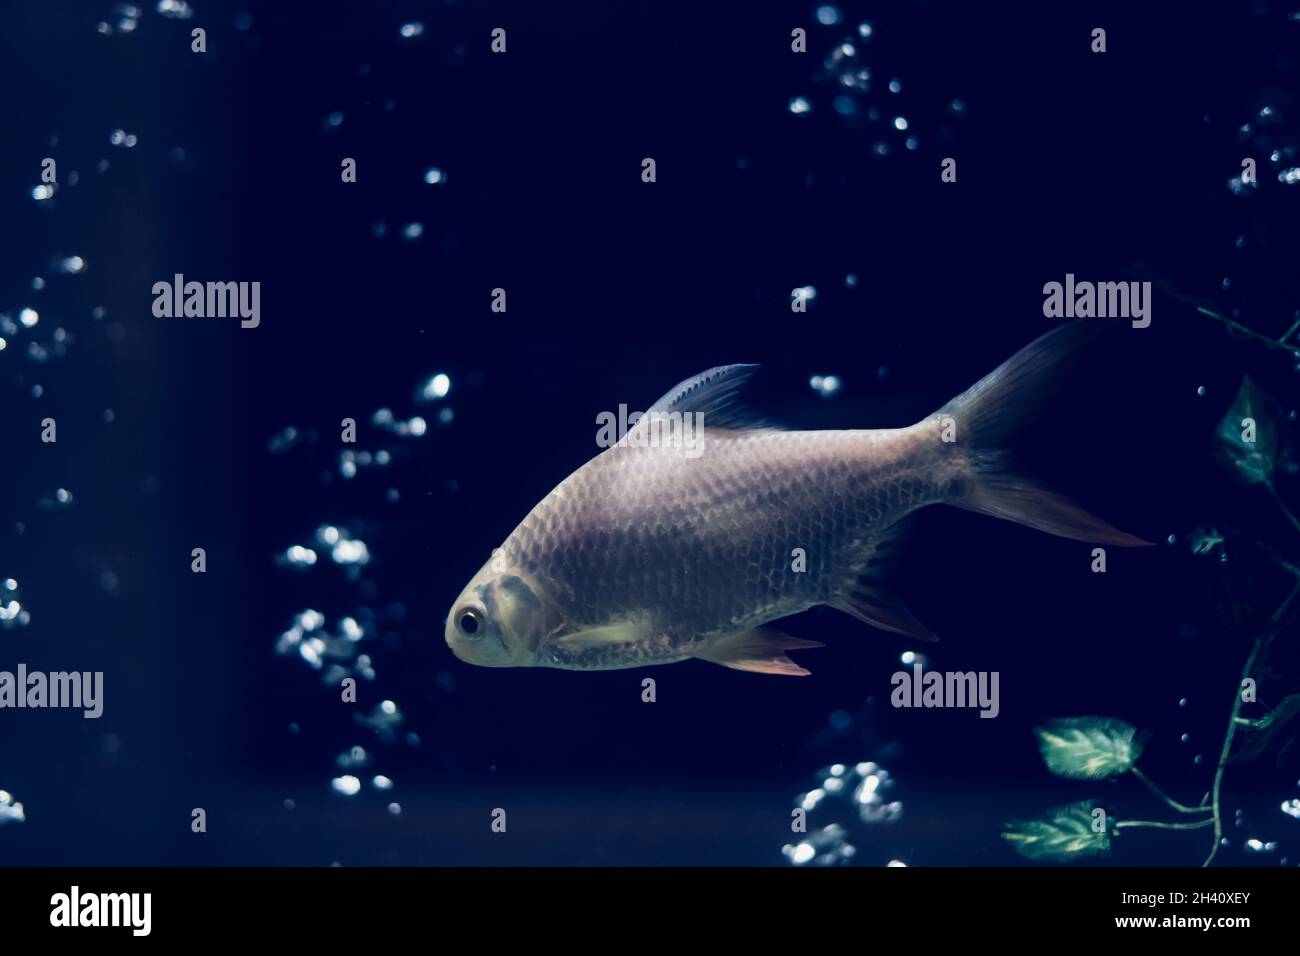 Photo dark blue night background Design. Water aquarium, silver fish swims, air bubbles by compressor. Mysterious Mood Loneliness Longing Appeasement Stock Photo